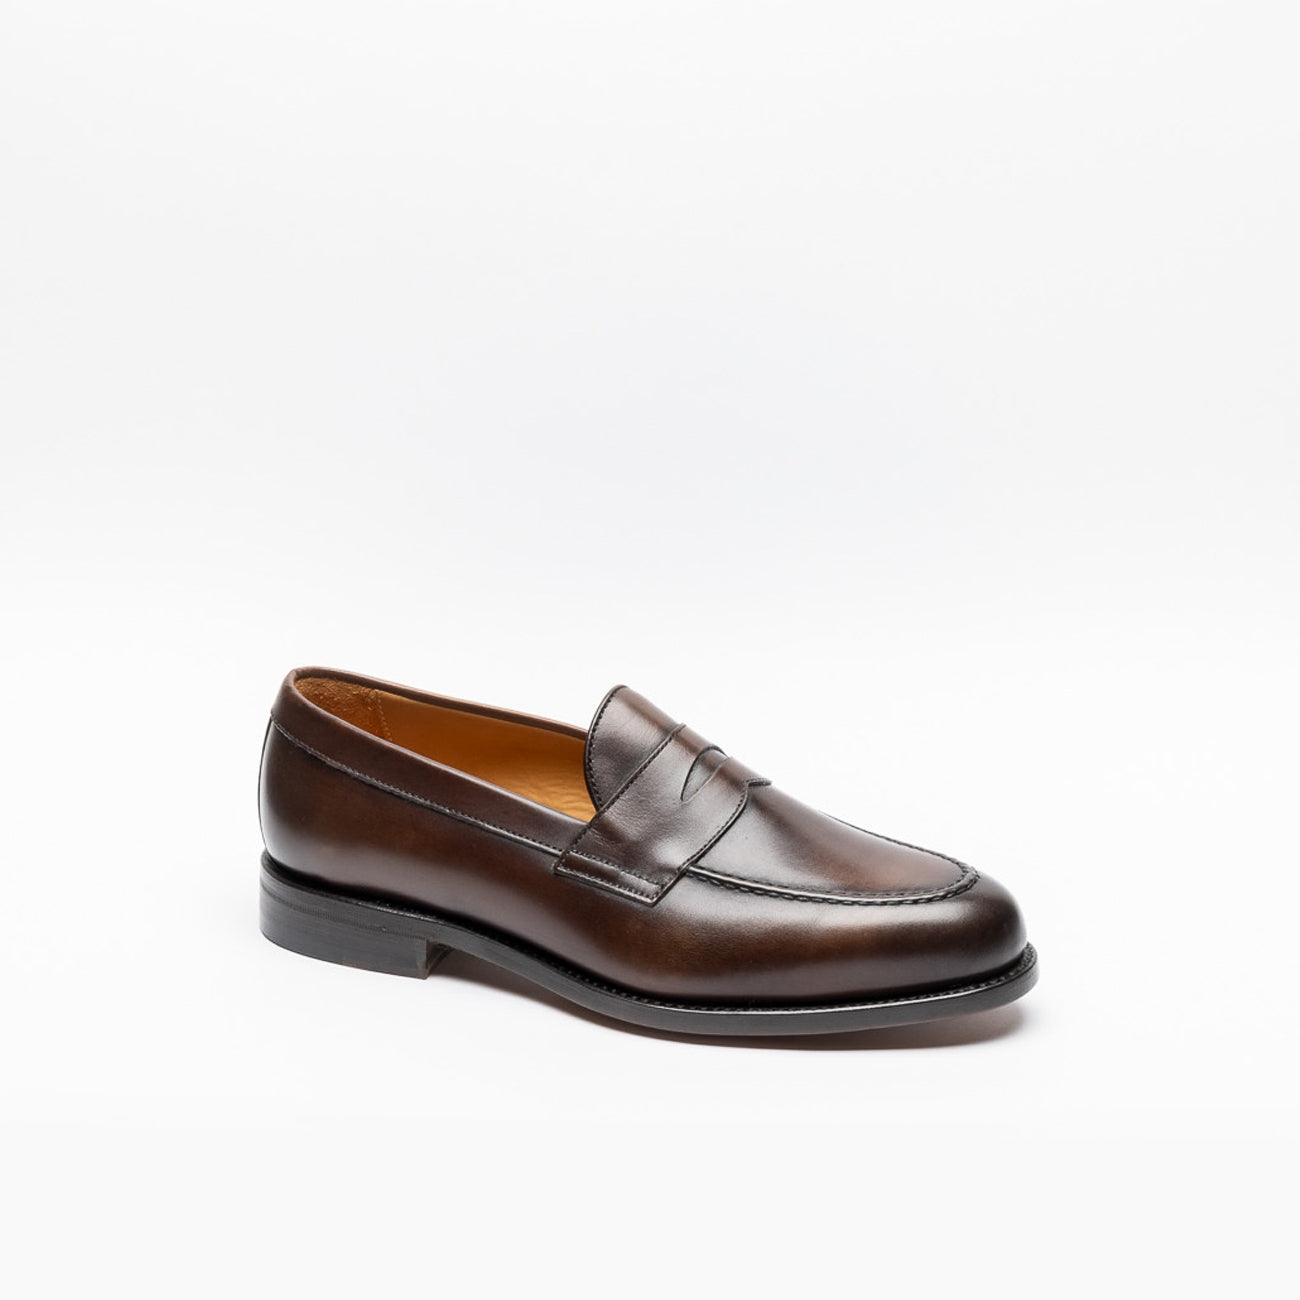 Berwick brown polished leather loafer